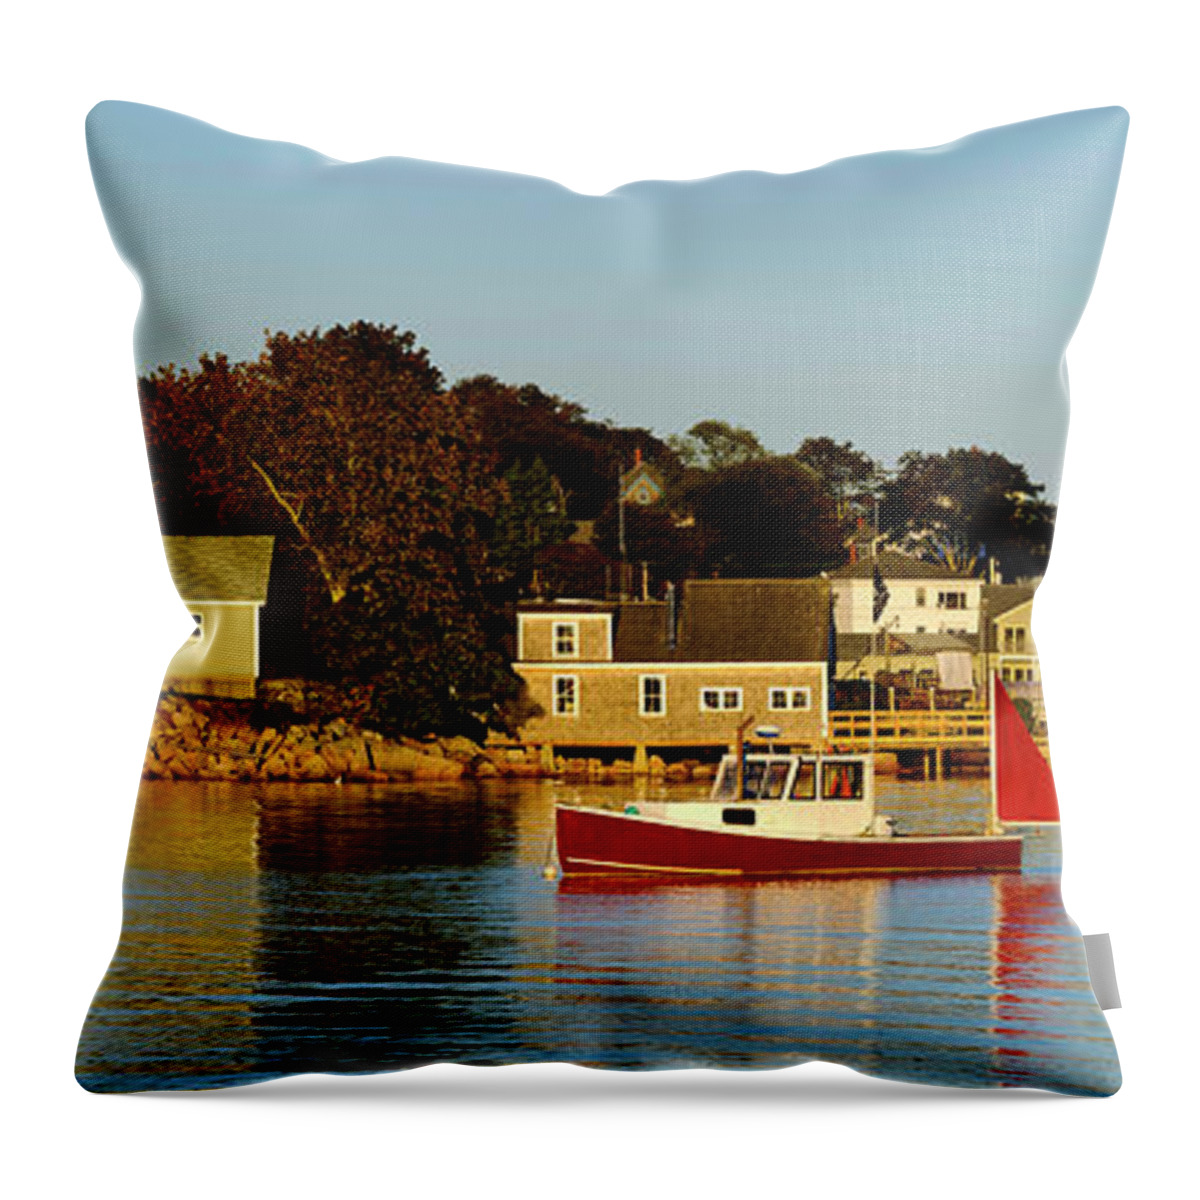 Photograph Throw Pillow featuring the photograph Fishing Boats In The Sea, Stonington by Panoramic Images